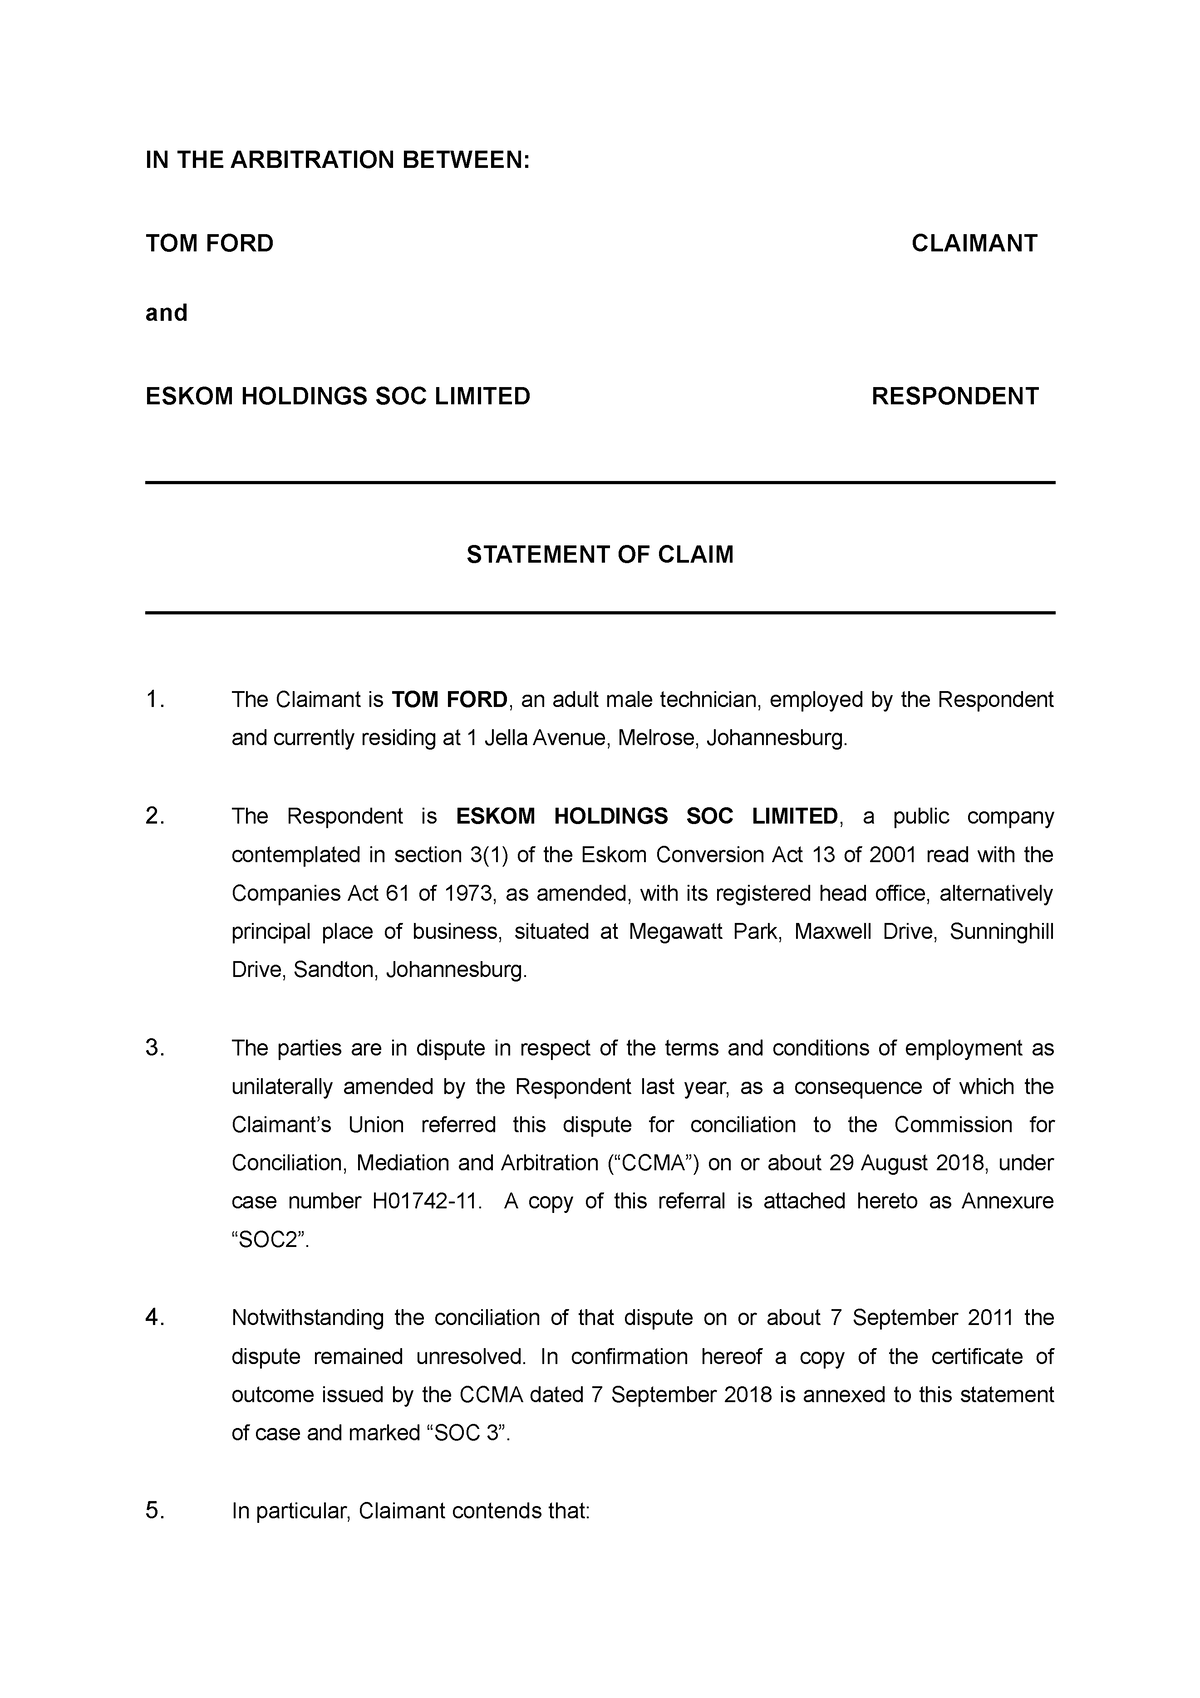 Statement of claim template 1 IN THE ARBITRATION BETWEEN: TOM FORD